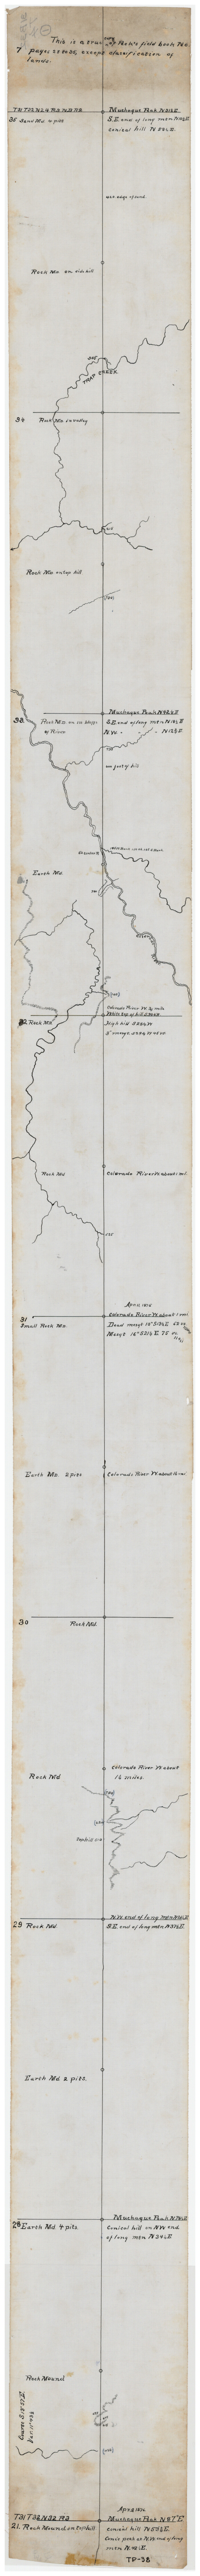 89728, This is a true copy of Peck's field book No. 7 pages 28 to 35, except classification of land, Twichell Survey Records